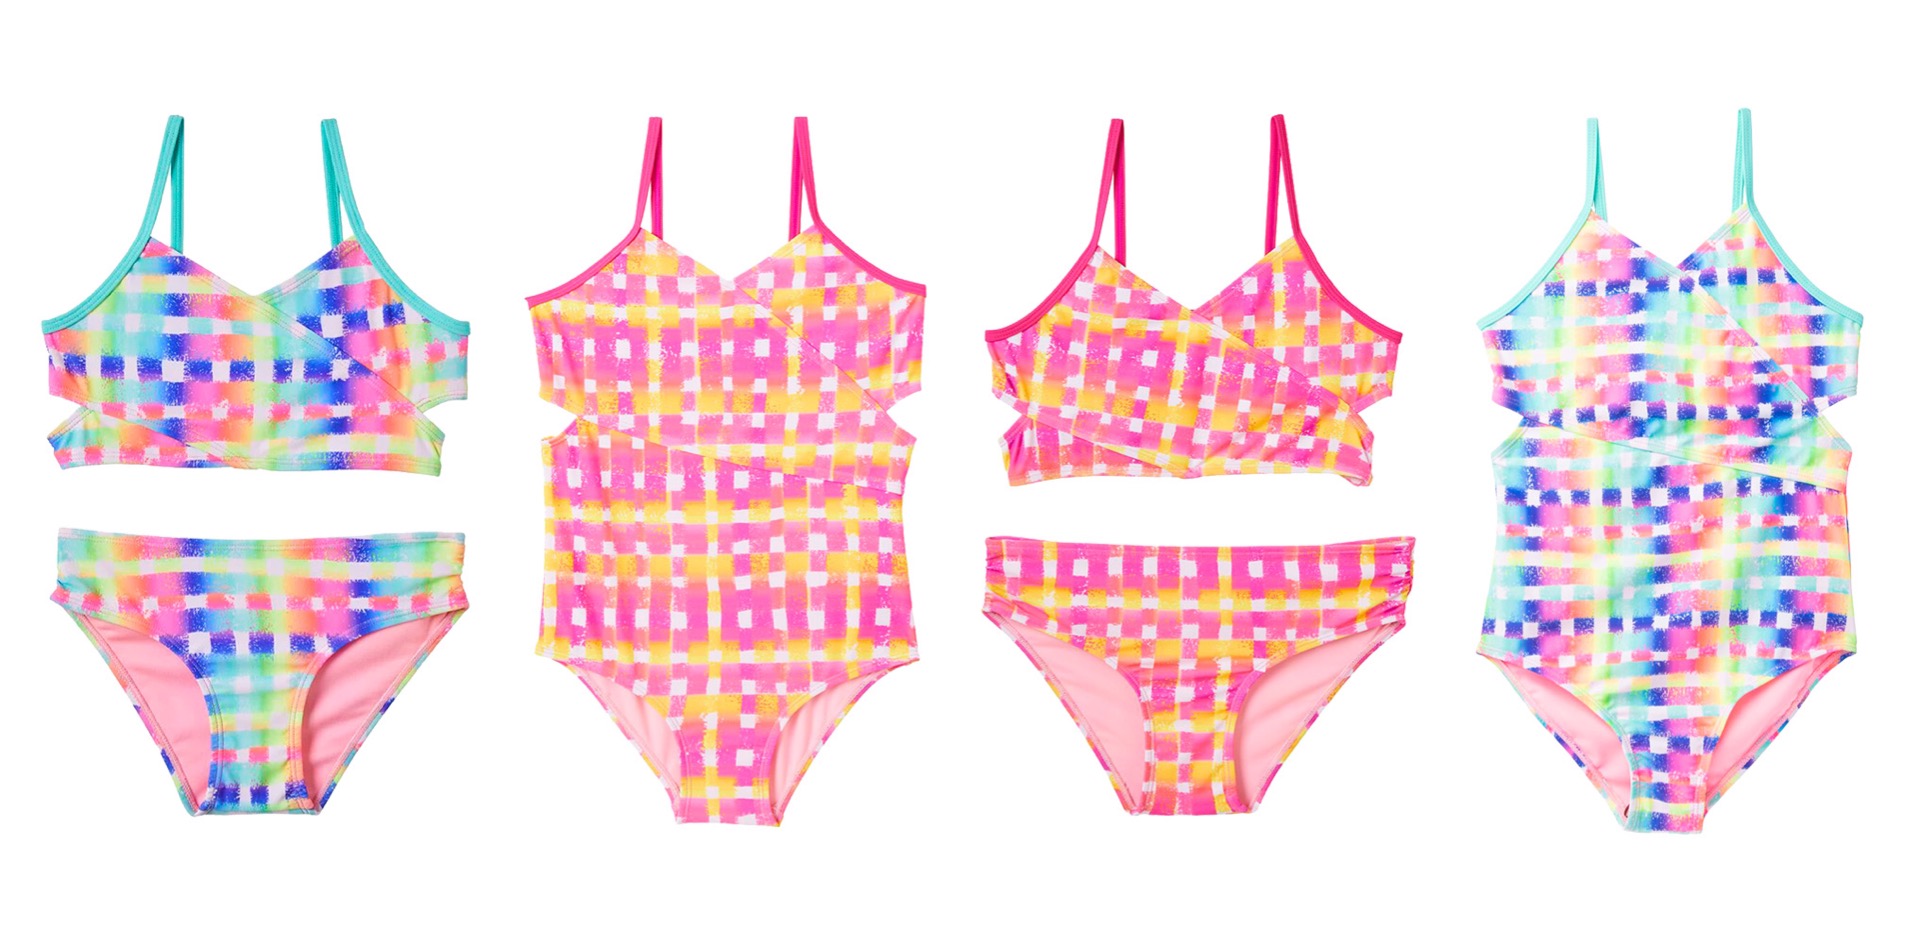 Girl's Rainbow Fashion One & Two-Piece Swimsuits - Gingham Striped Print - Sizes 7-16